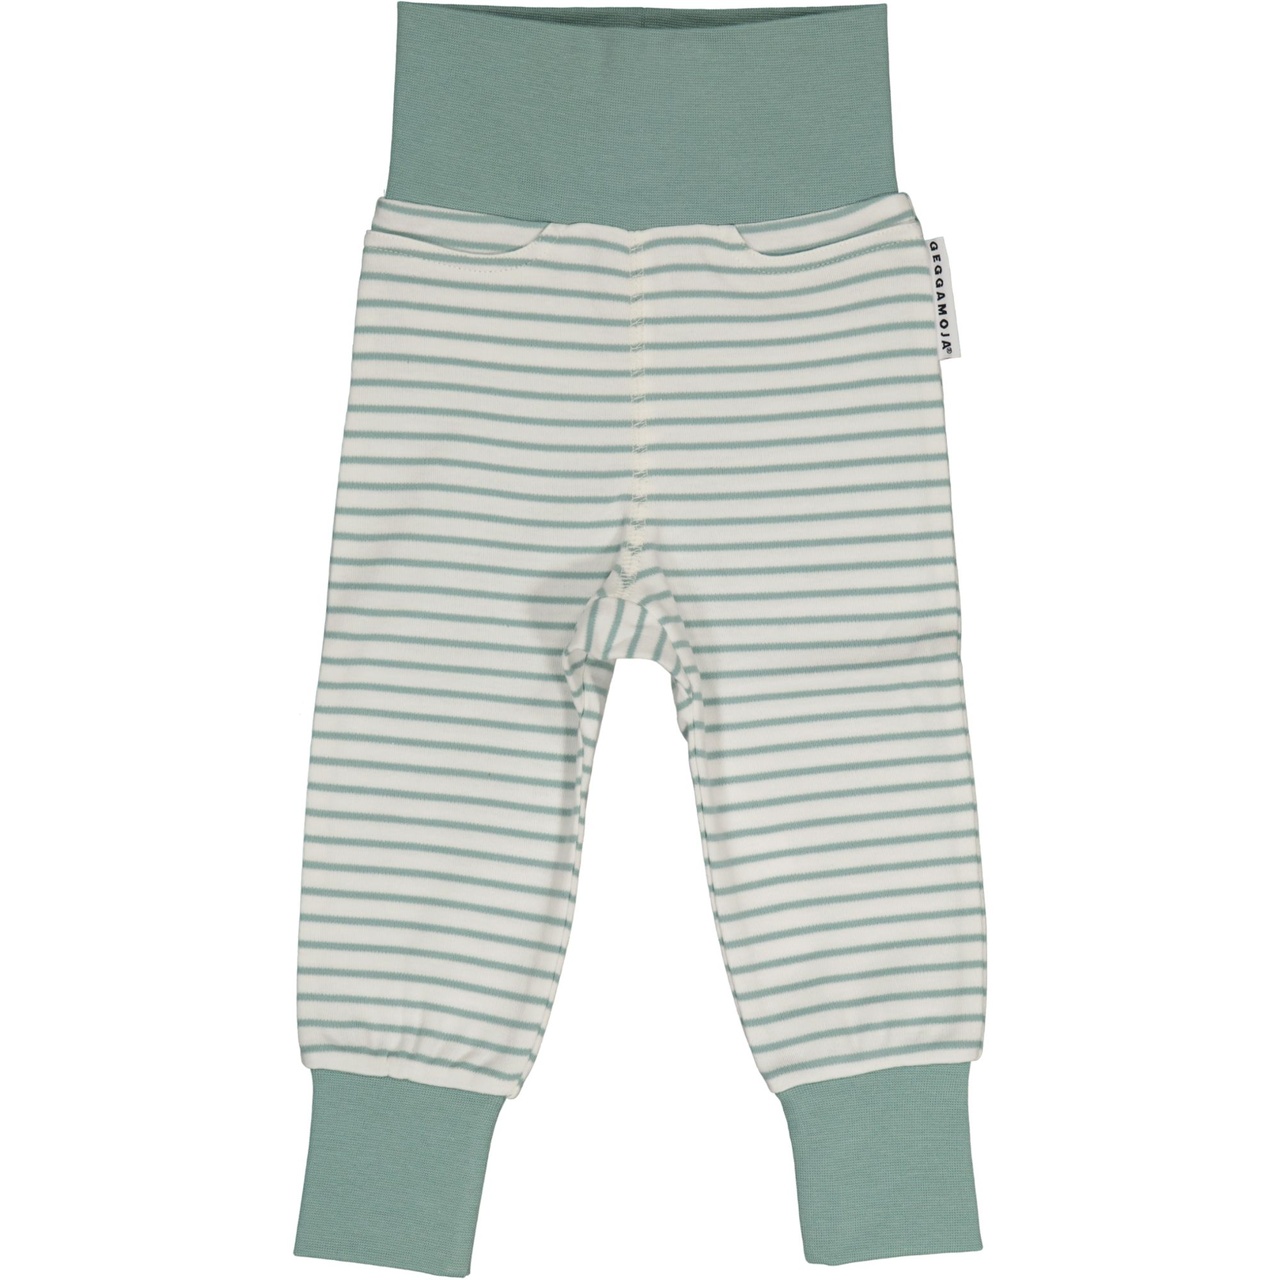 Baby trouser L.green/offwhite